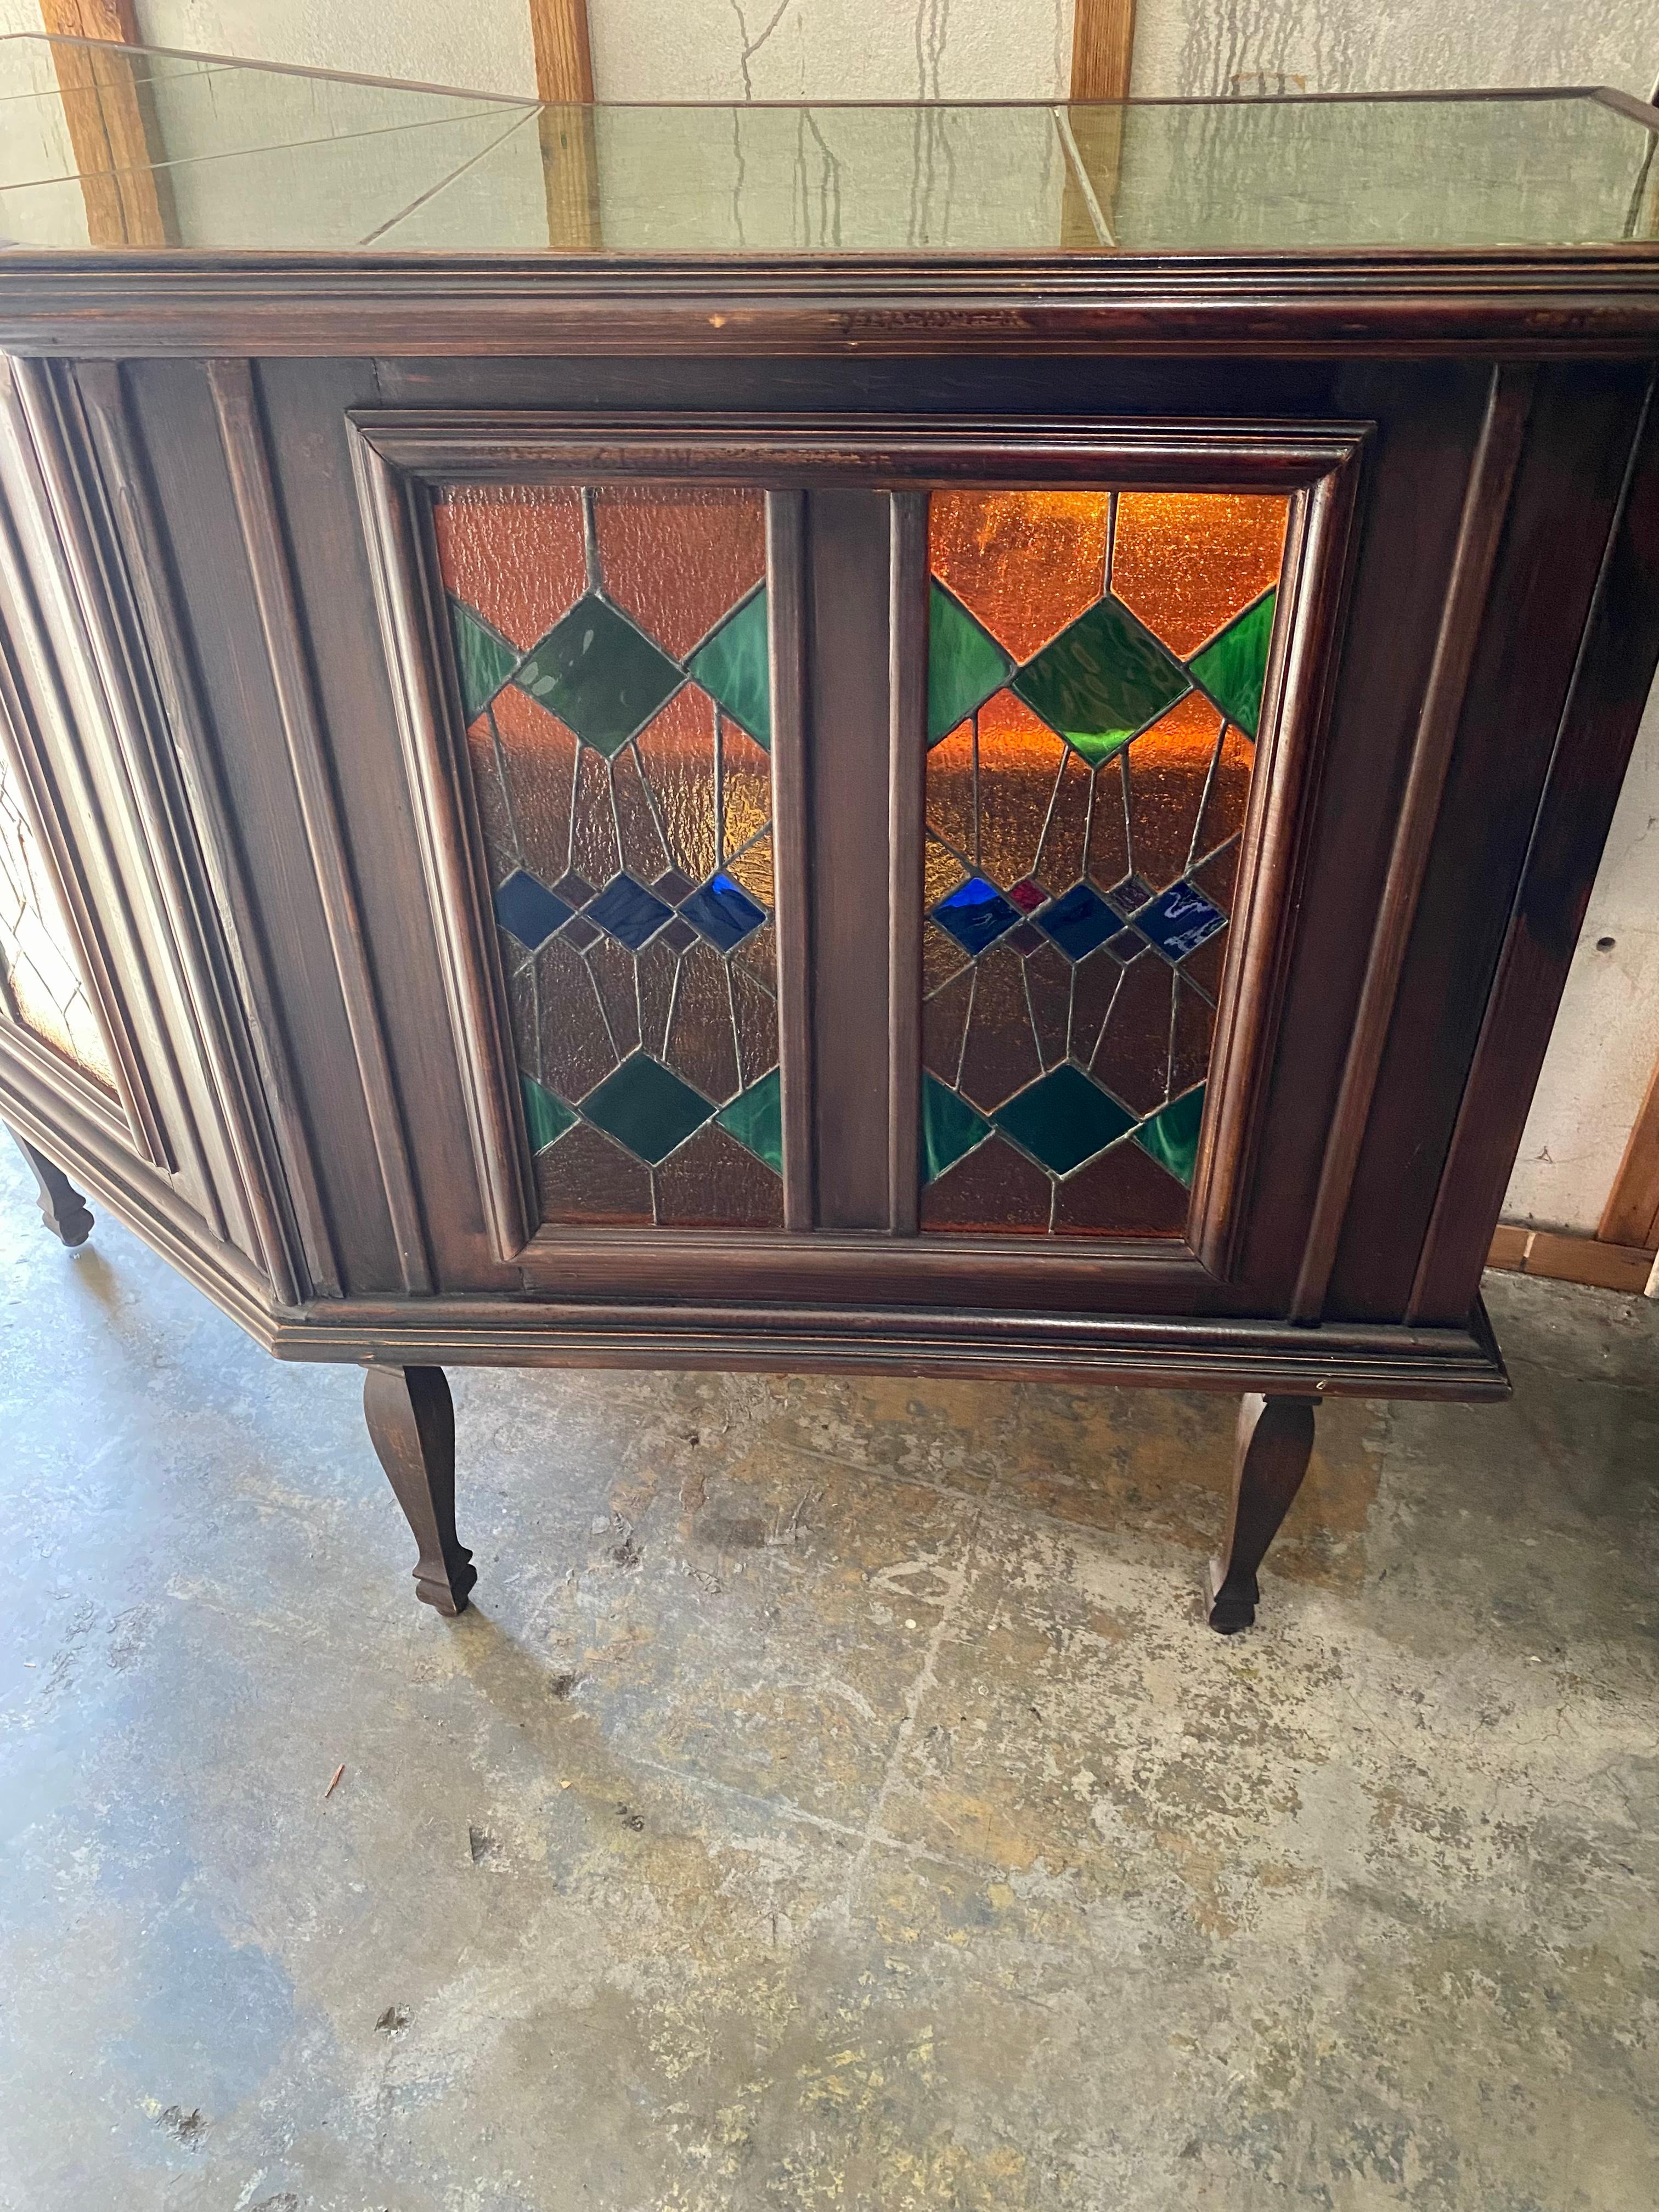 1940s Art Deco Angular Marble Tile Stained Glass Bar Cabinet Console For Sale 7